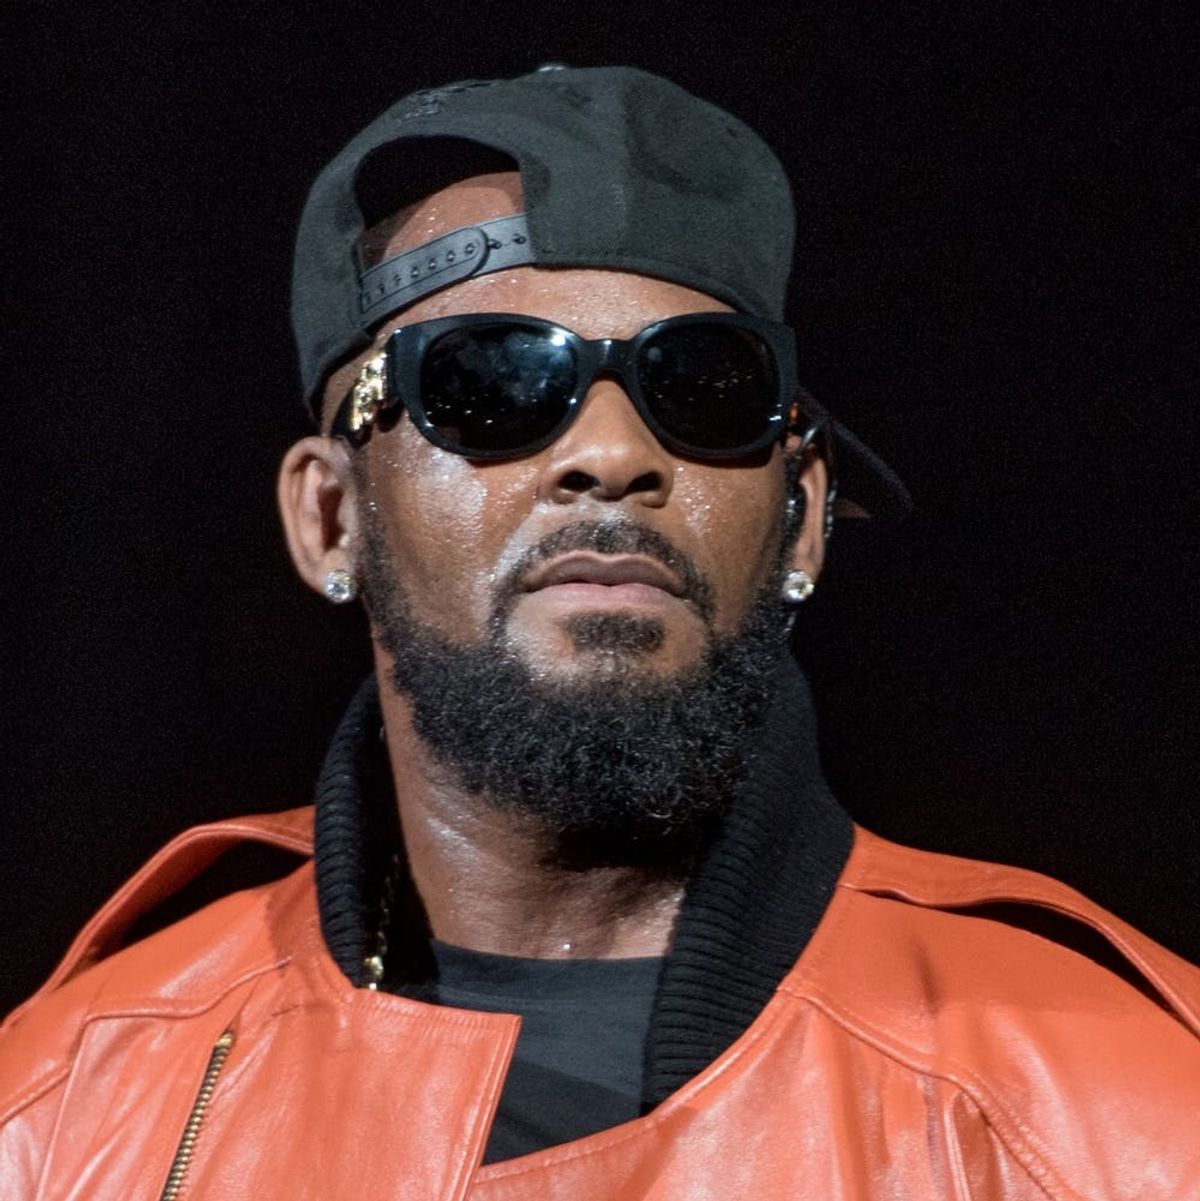 R. Kelly Is Threatening to Sue Lifetime Over a 6-Part Docuseries Focusing on Allegations of Abuse